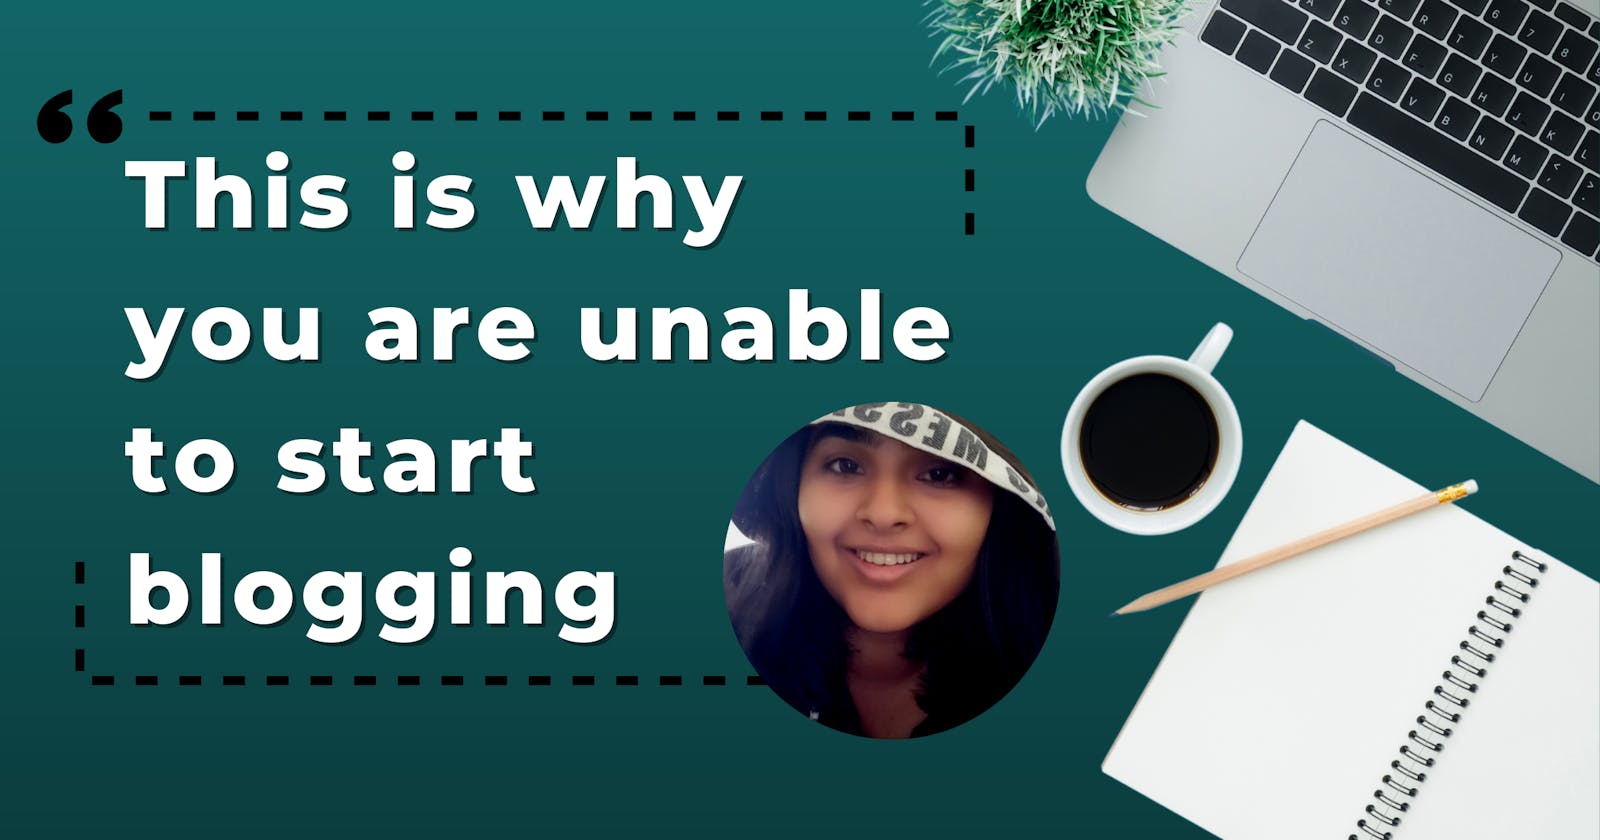 This is why you are unable to start blogging